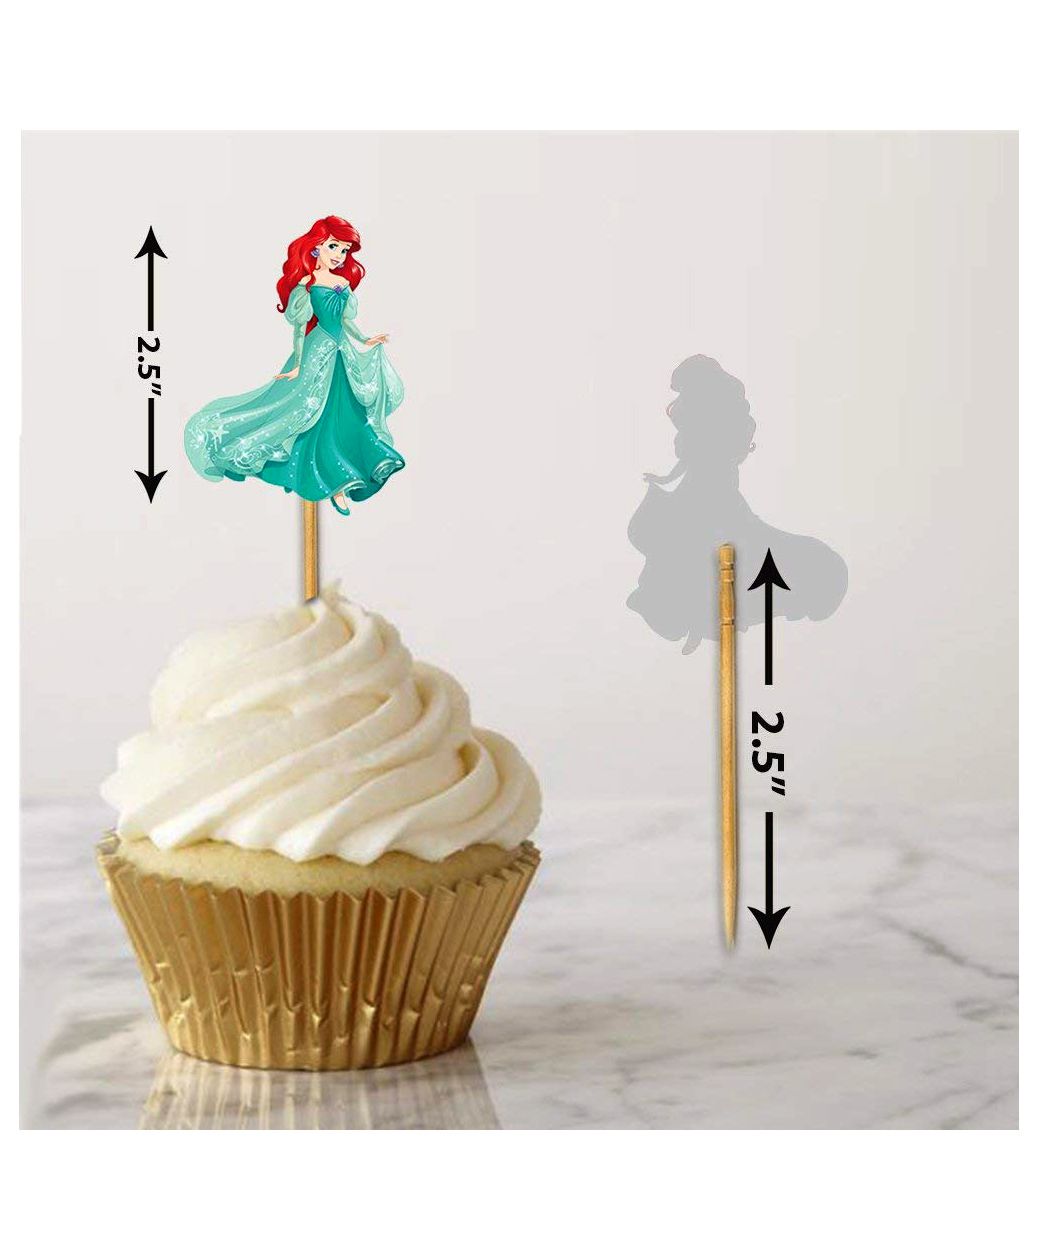 Yunison 24pc Halloween Cupcake Toppers for Party Supplies Cake Decoration 